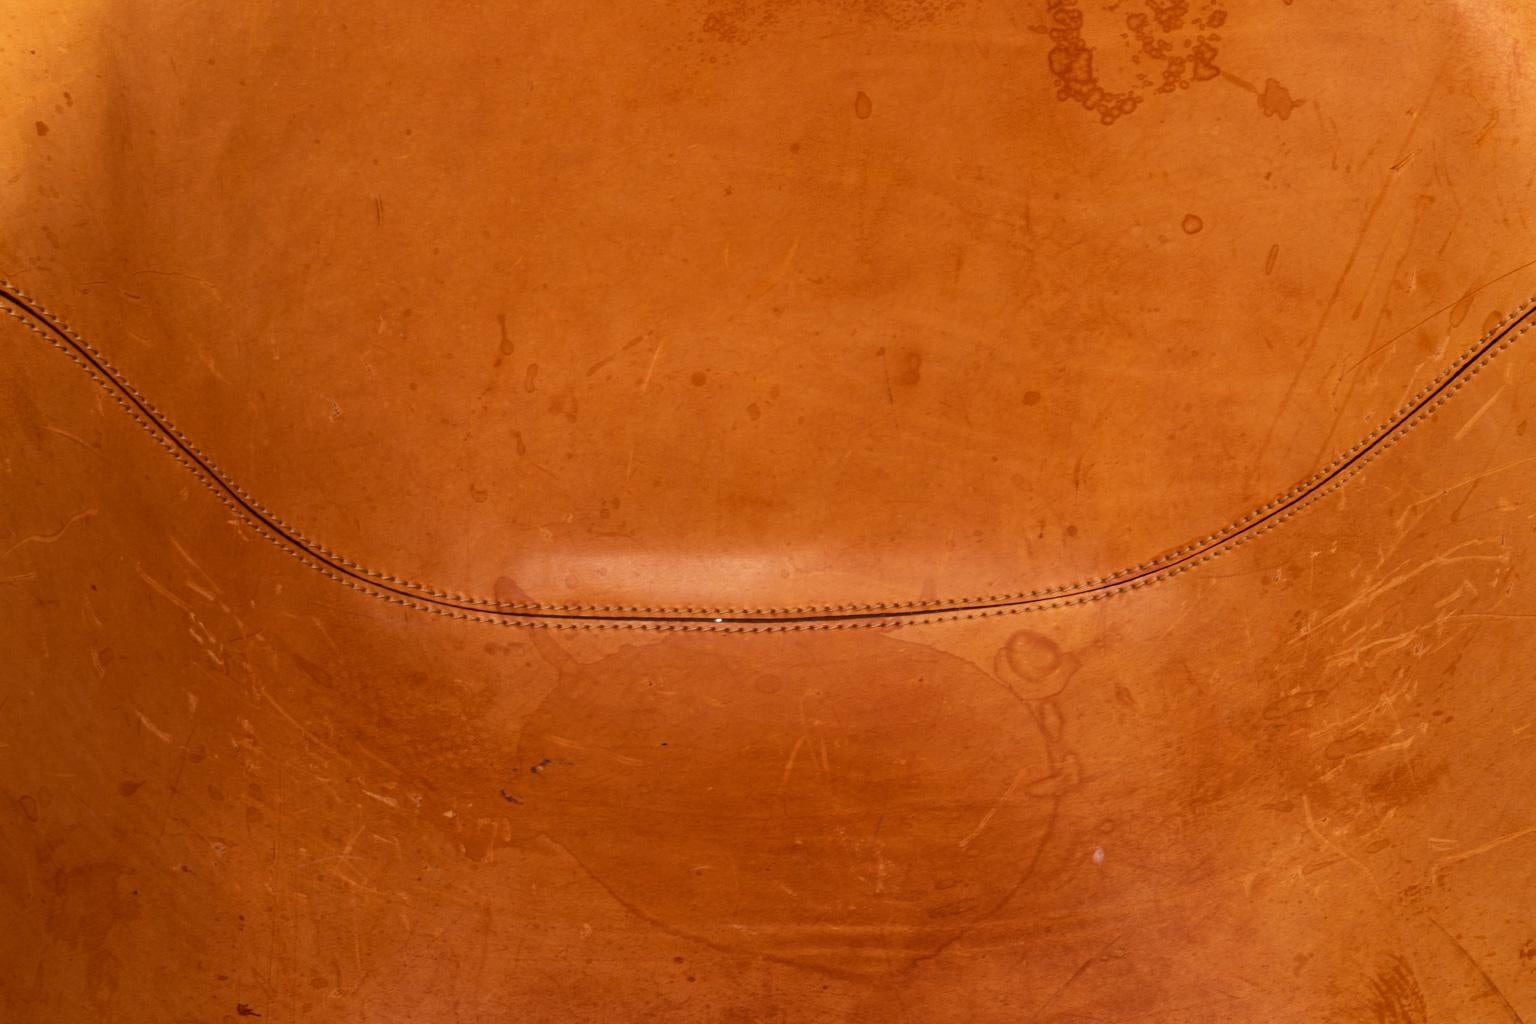 Italian leather Max Alto designed Antonio Citterio armchair on a metal base. Please note of wear consistent with age including stains to the leather.